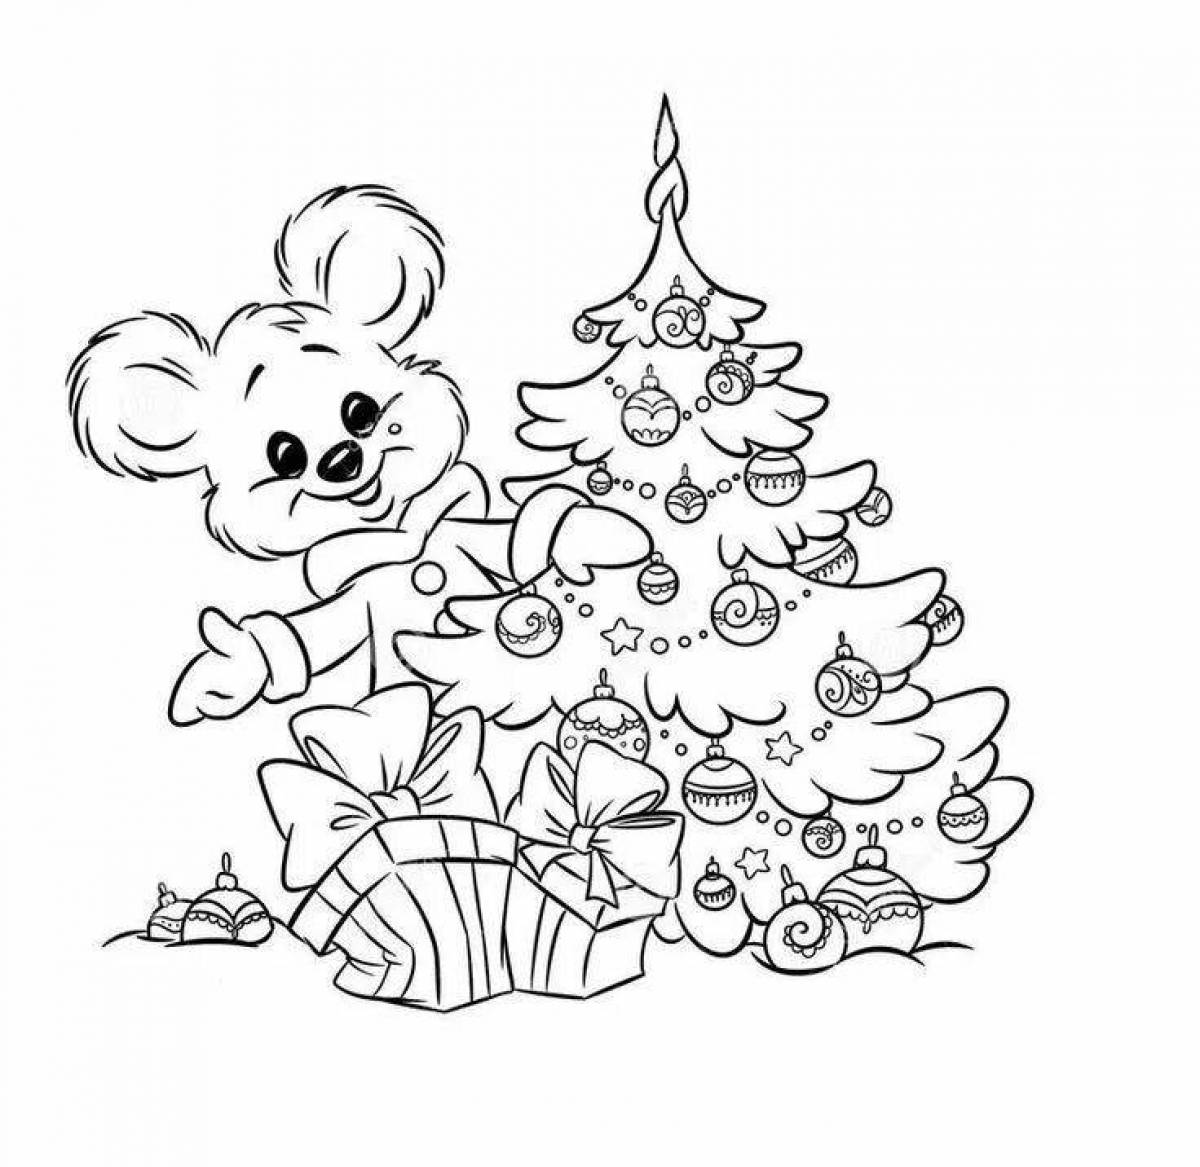 Glitter Christmas tree and rabbit coloring book